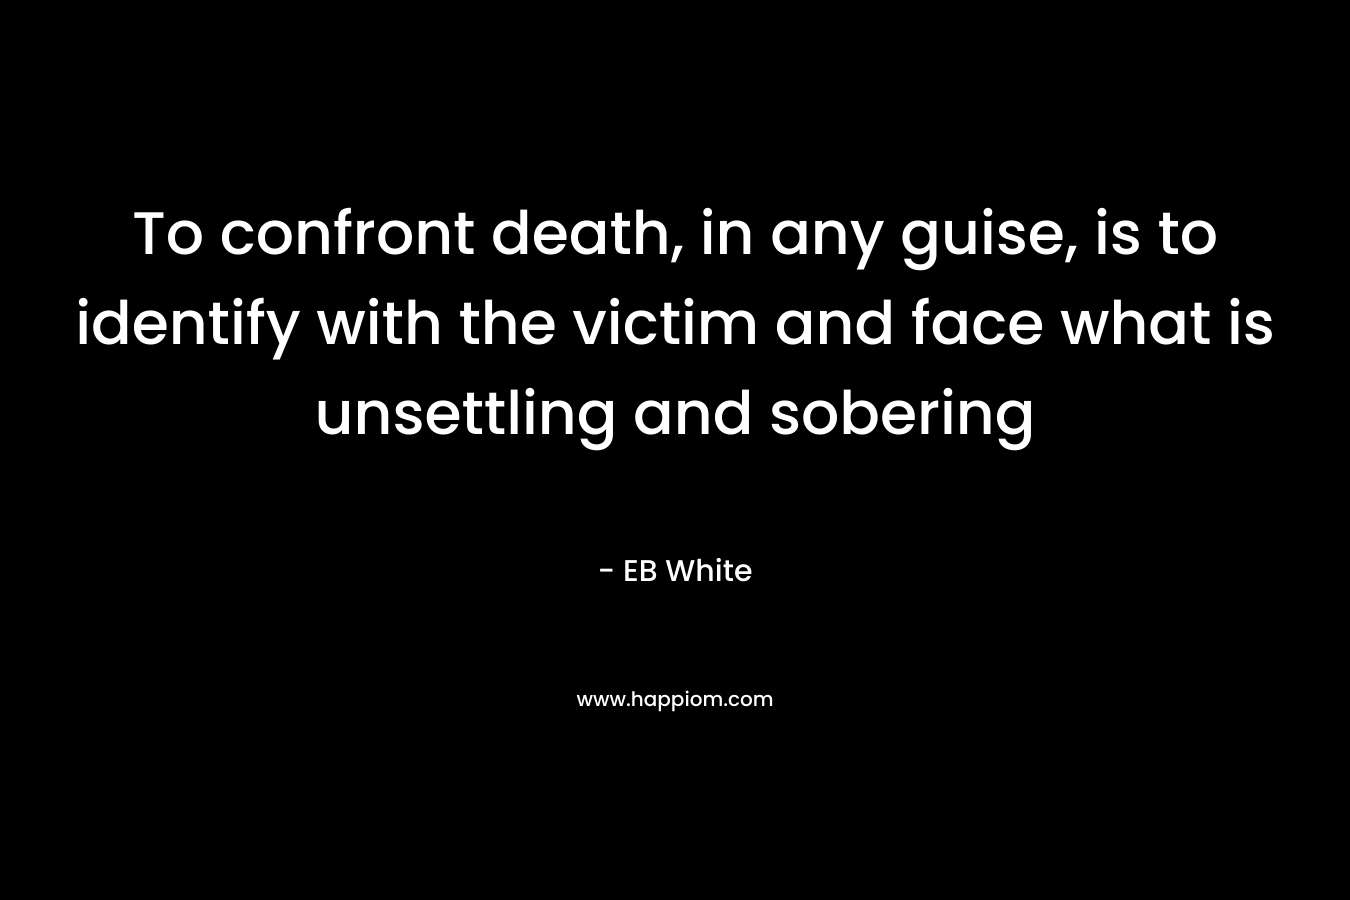 To confront death, in any guise, is to identify with the victim and face what is unsettling and sobering – EB White